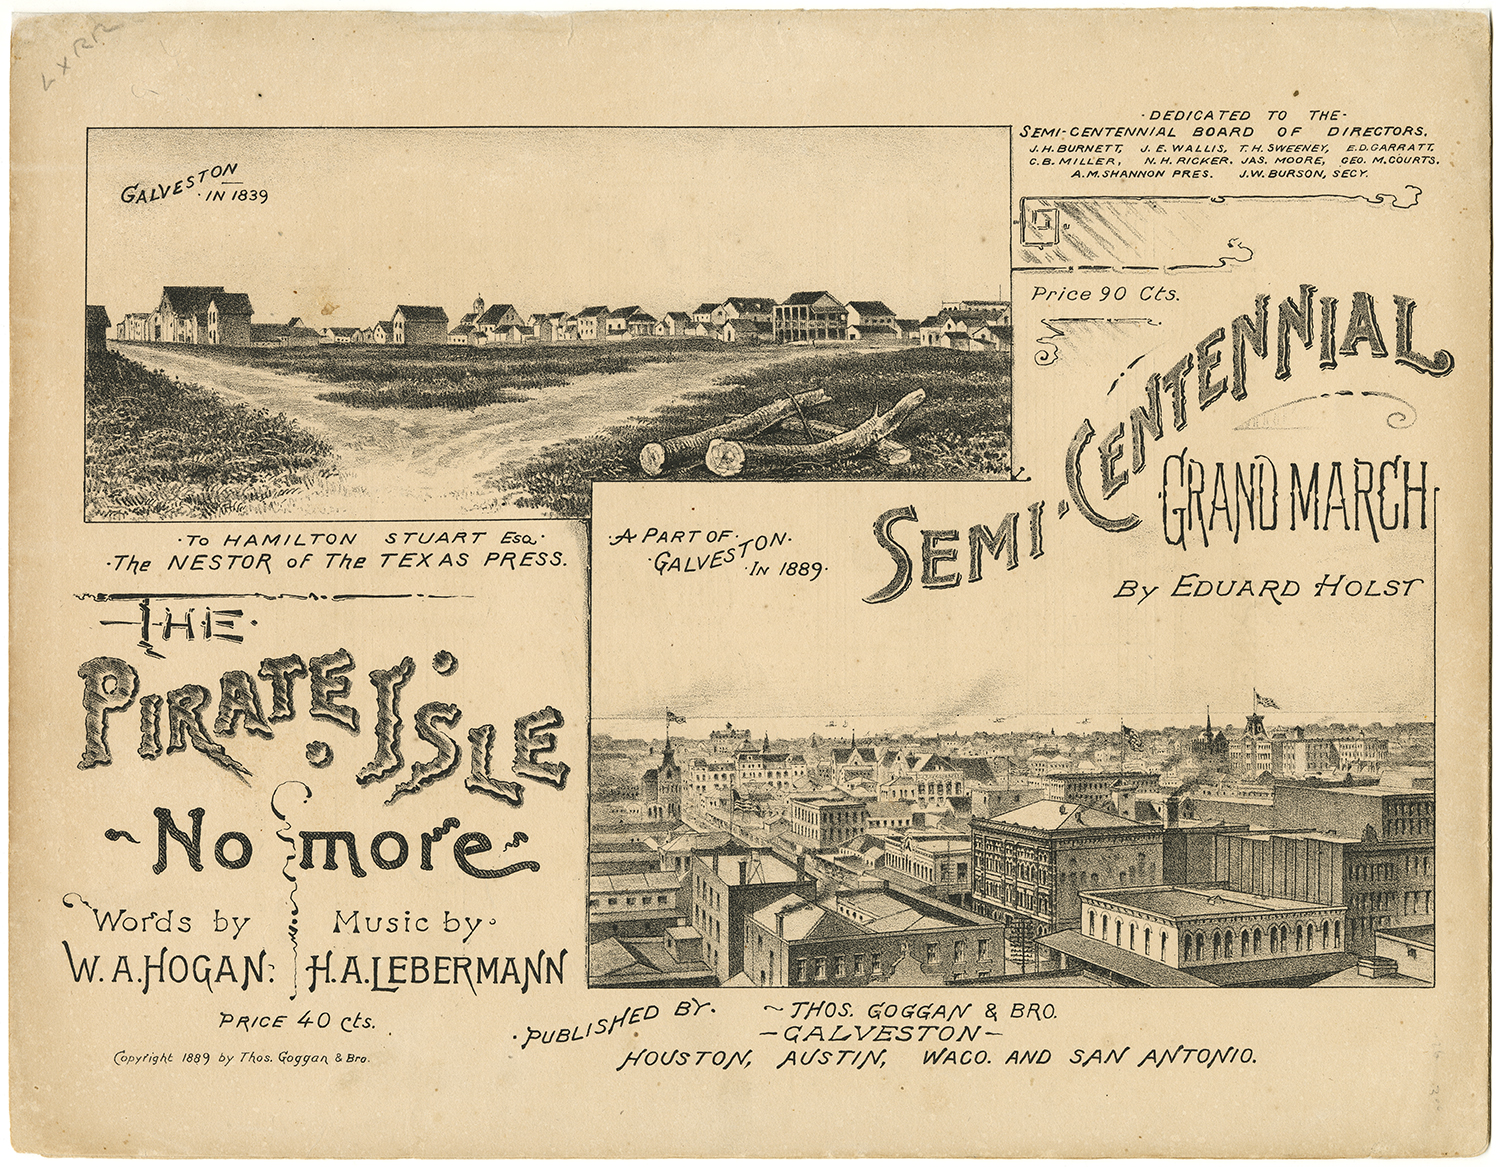 Sheet music cover for "The Pirate Isle No More" and the "Semi-Centennial Grand March"